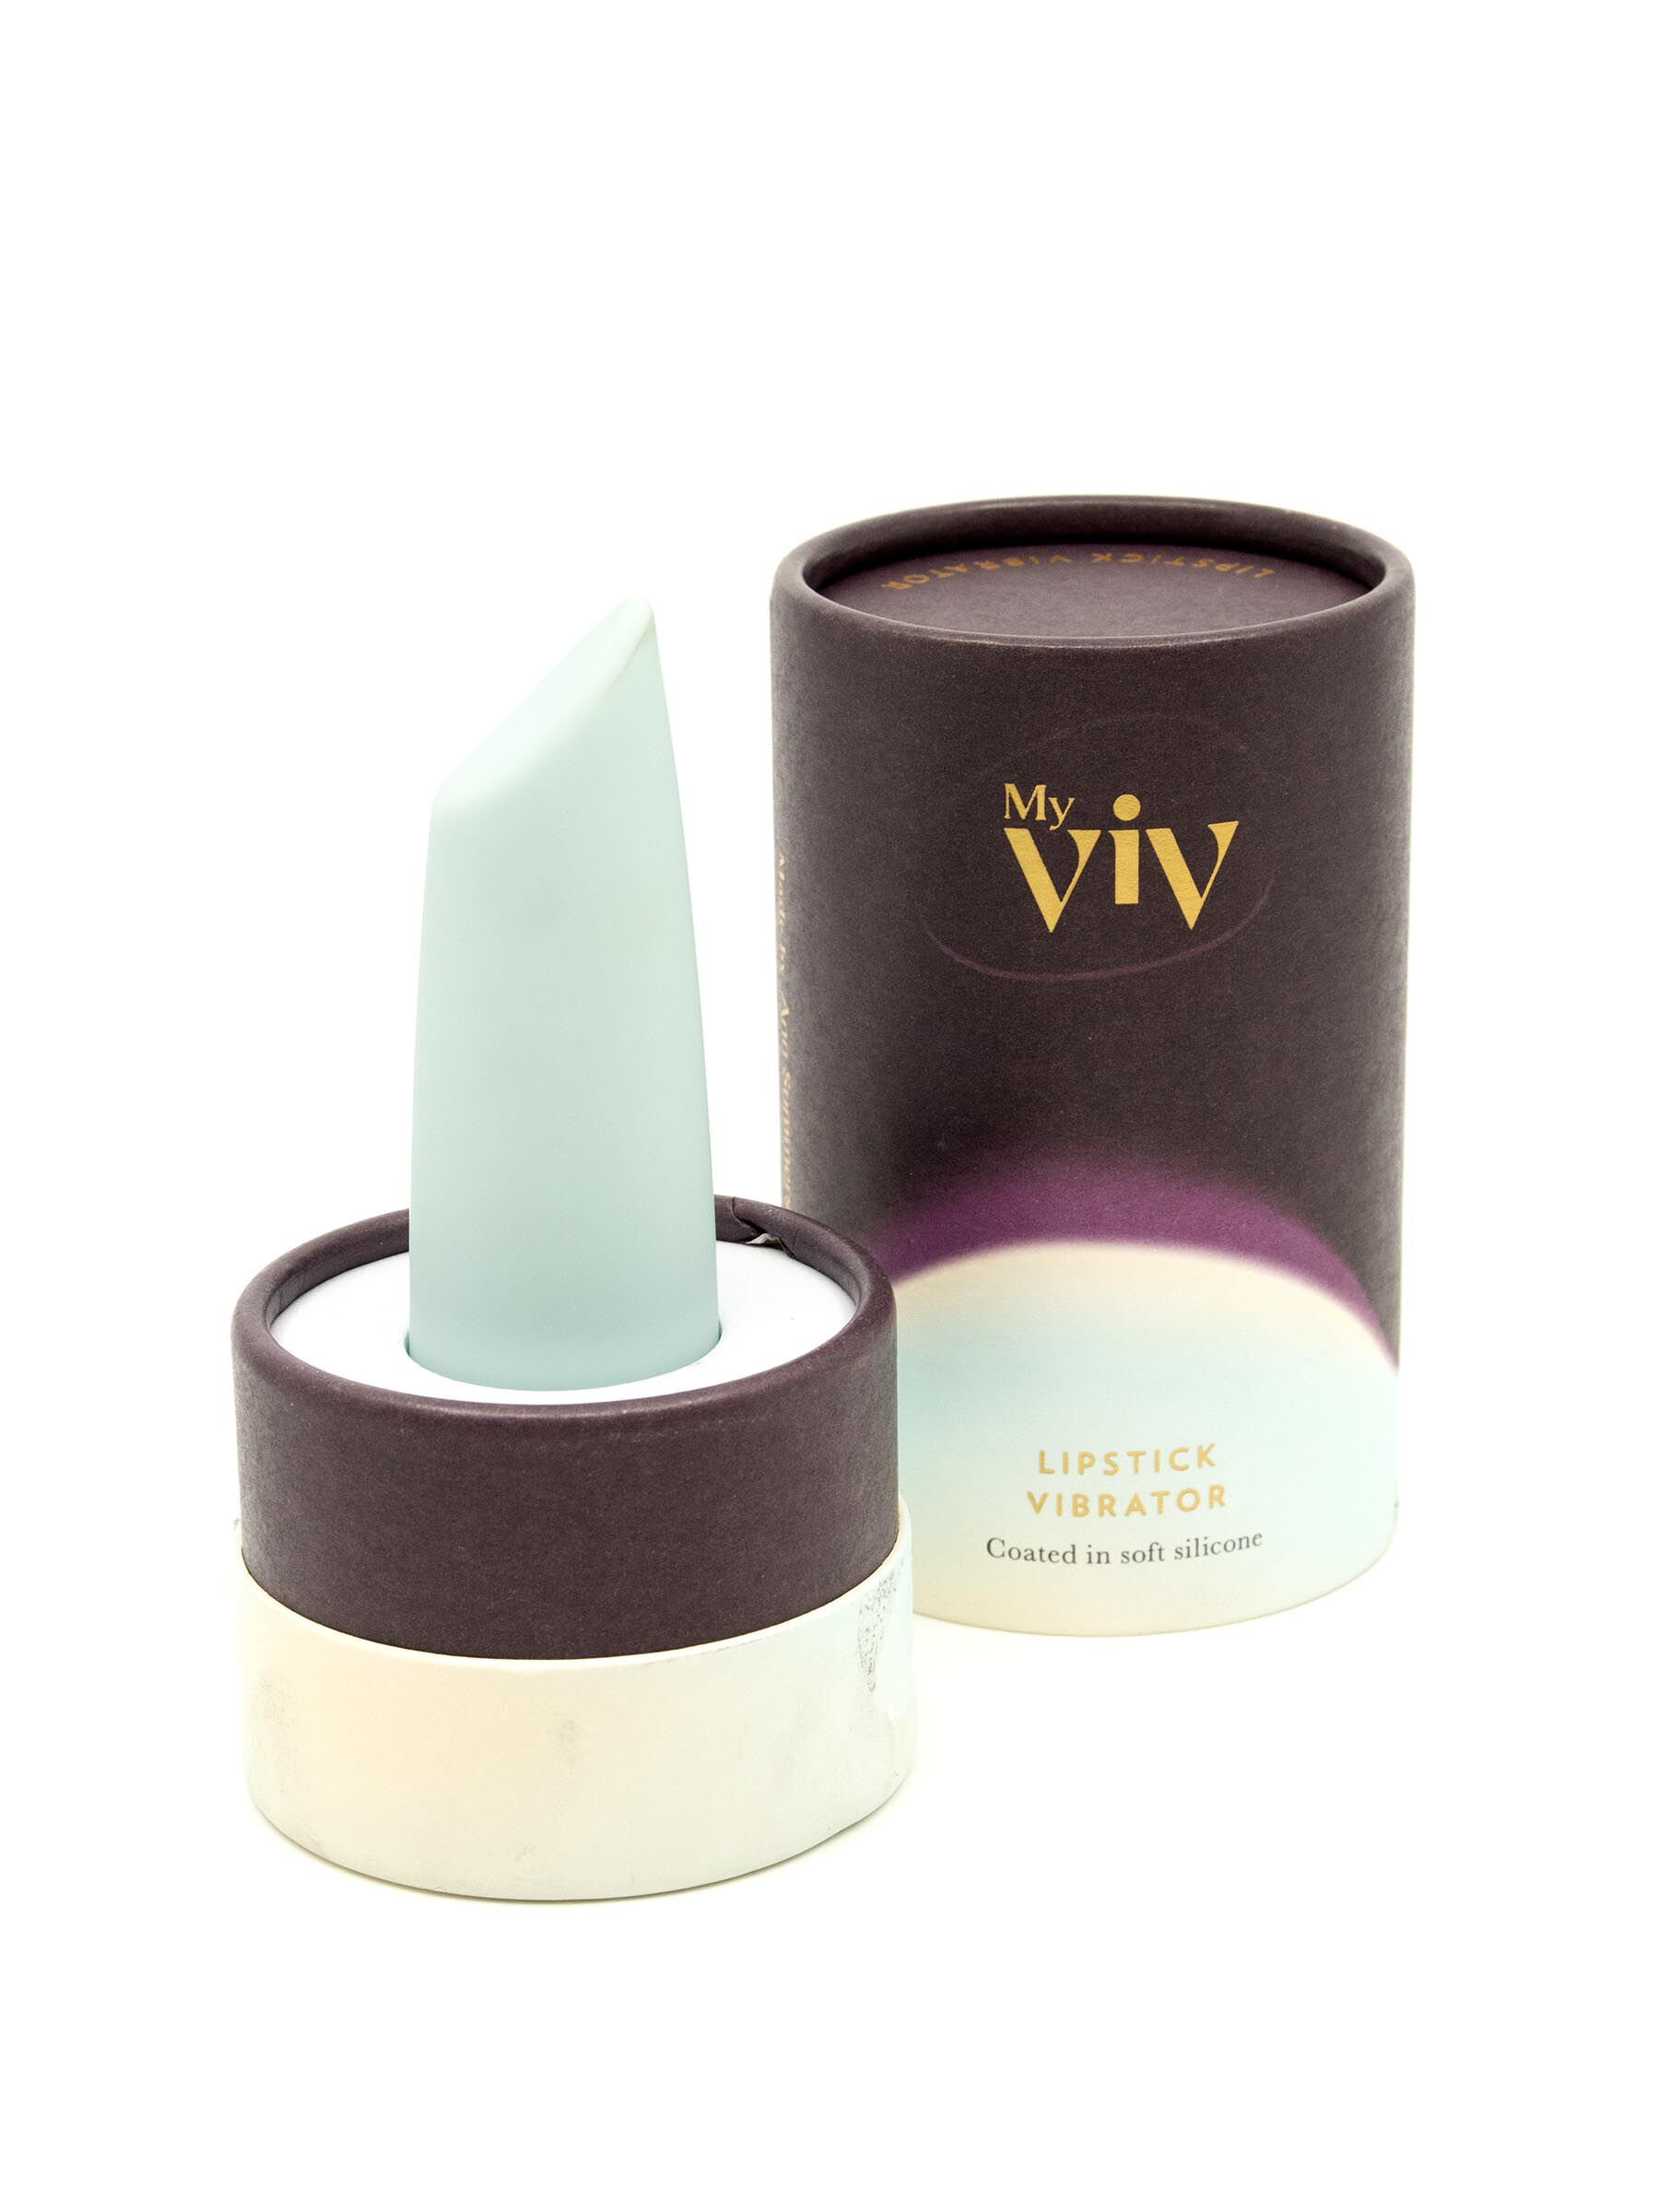 Designed to be discreet whilst delivering targeted clitoral stimulation, The My Viv Lipstick Vibrator has a tapered shape with 10 vibration settings, allowing you to control your own intensity at just the touch of a button, discovering all your body's erogenous zones. Small enough to conceal for travel, it's waterproof to enjoy some pleasurable water therapy. We recommend adding the My Viv lubricant for an optimised experience and clean with My Viv Toy Cleaner.